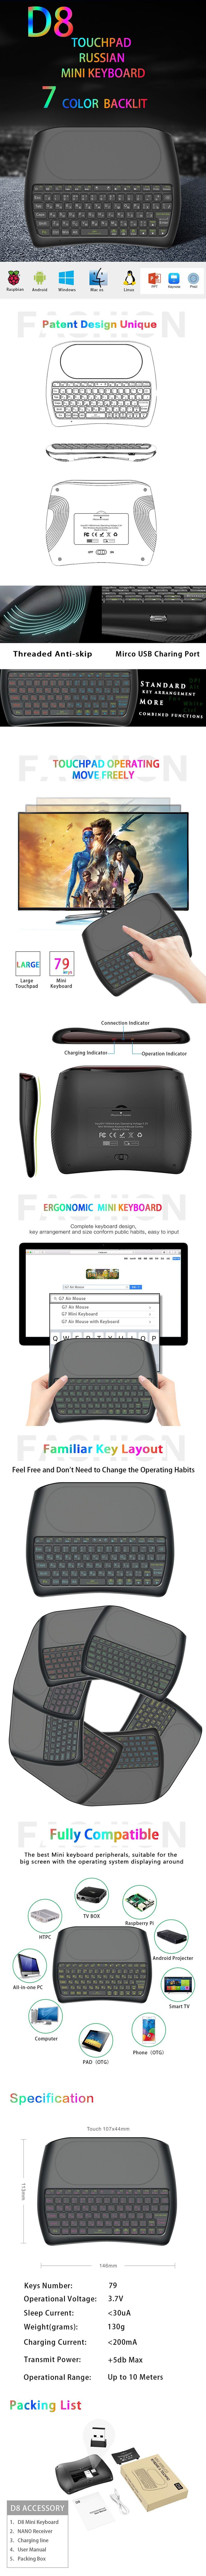 Mini-I8-D8-S-English-Russian-Laser-Version-wireless-24GHz-keyboard-MX3-Air-Mouse-1366419